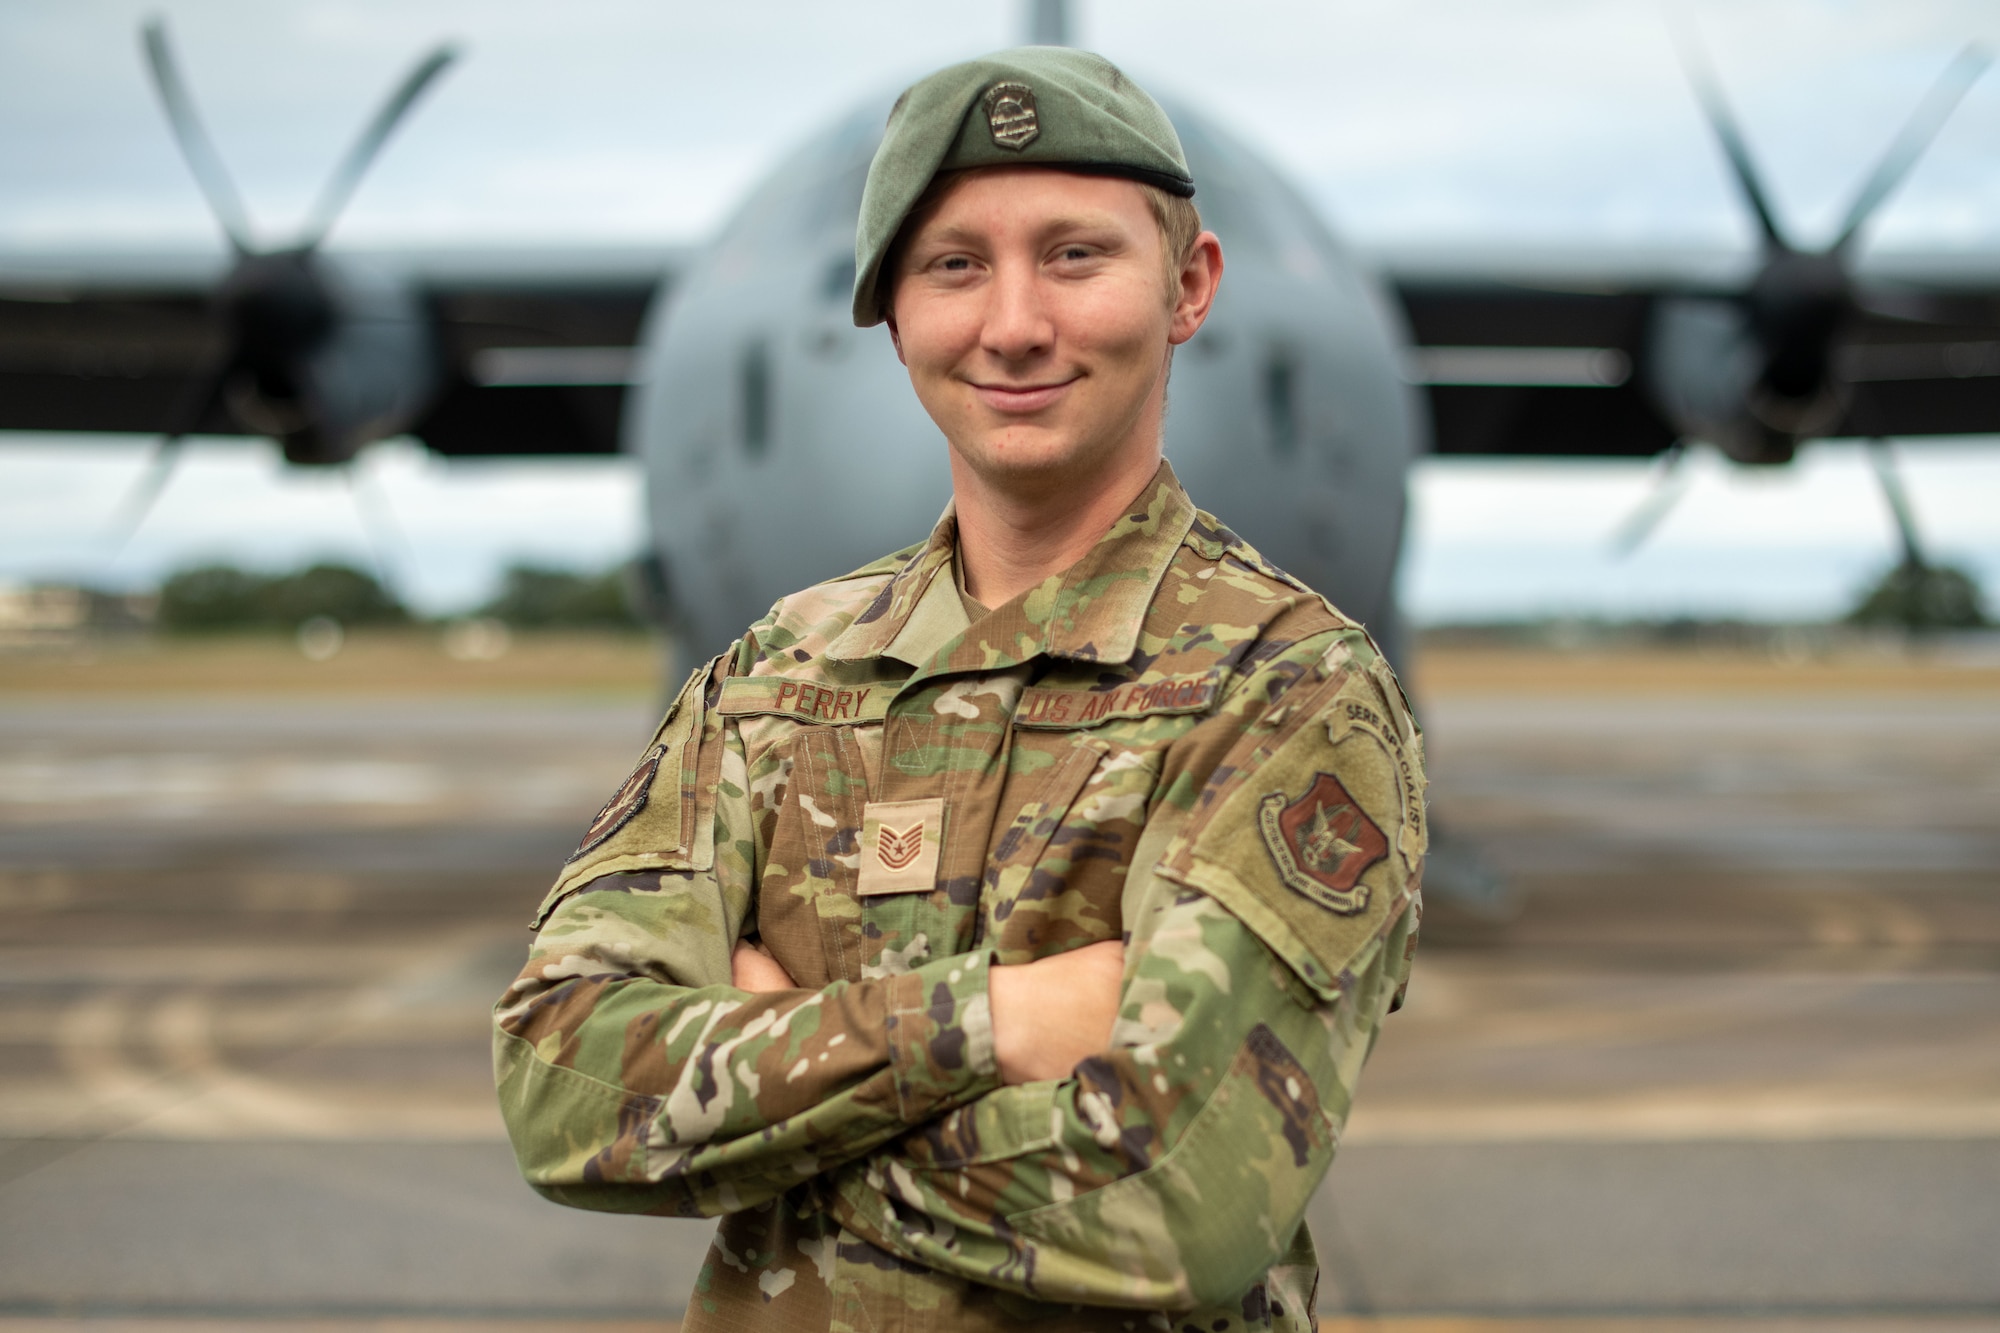 Tech Sgt Perry stands directly in front of a C-130J